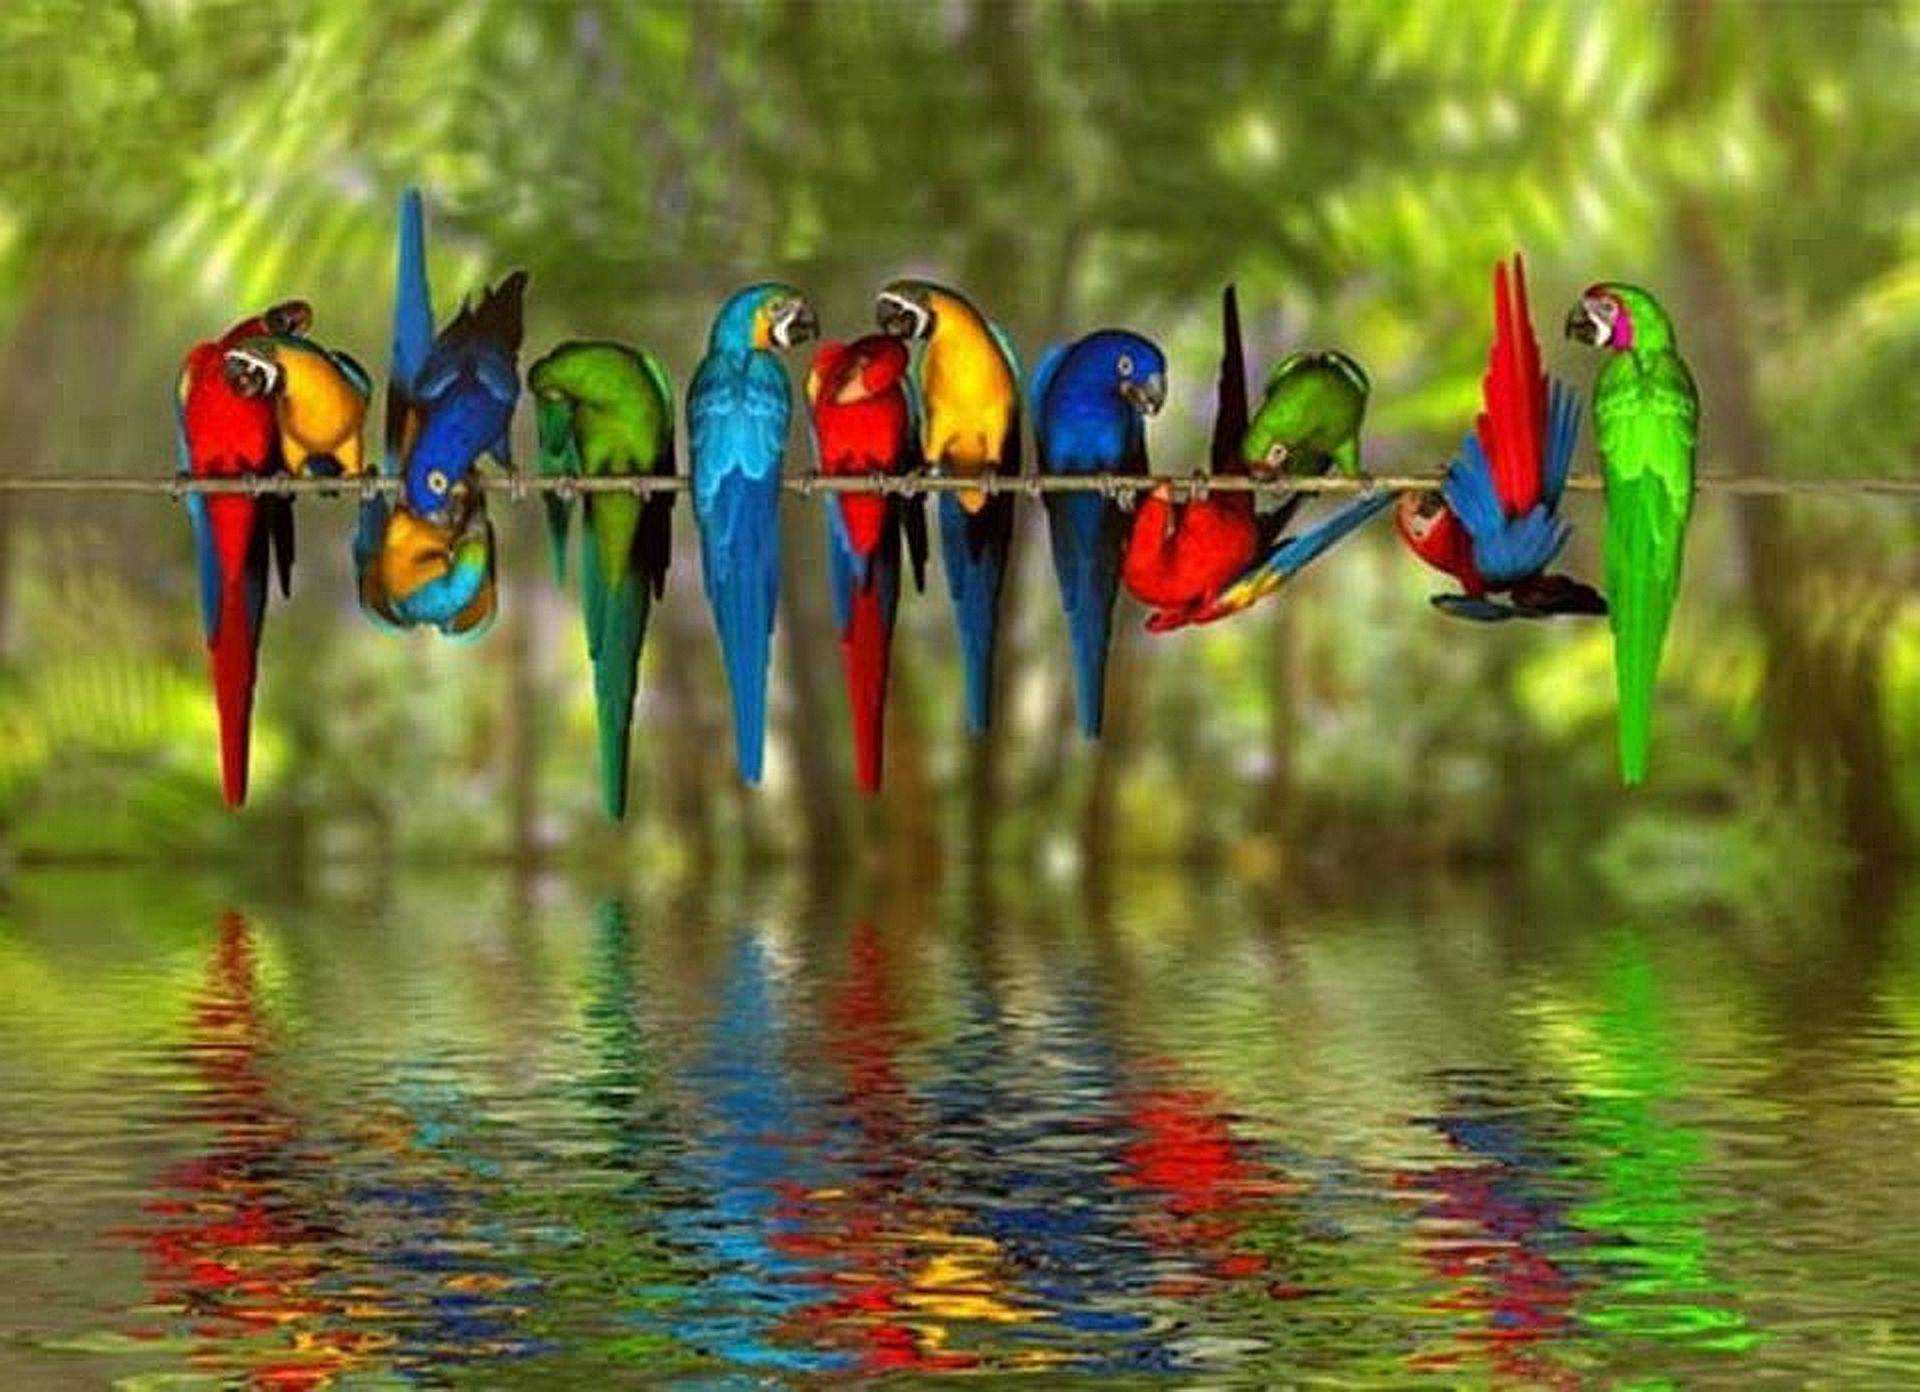 Chorus Line Of Parrots A Beautiful Colorful